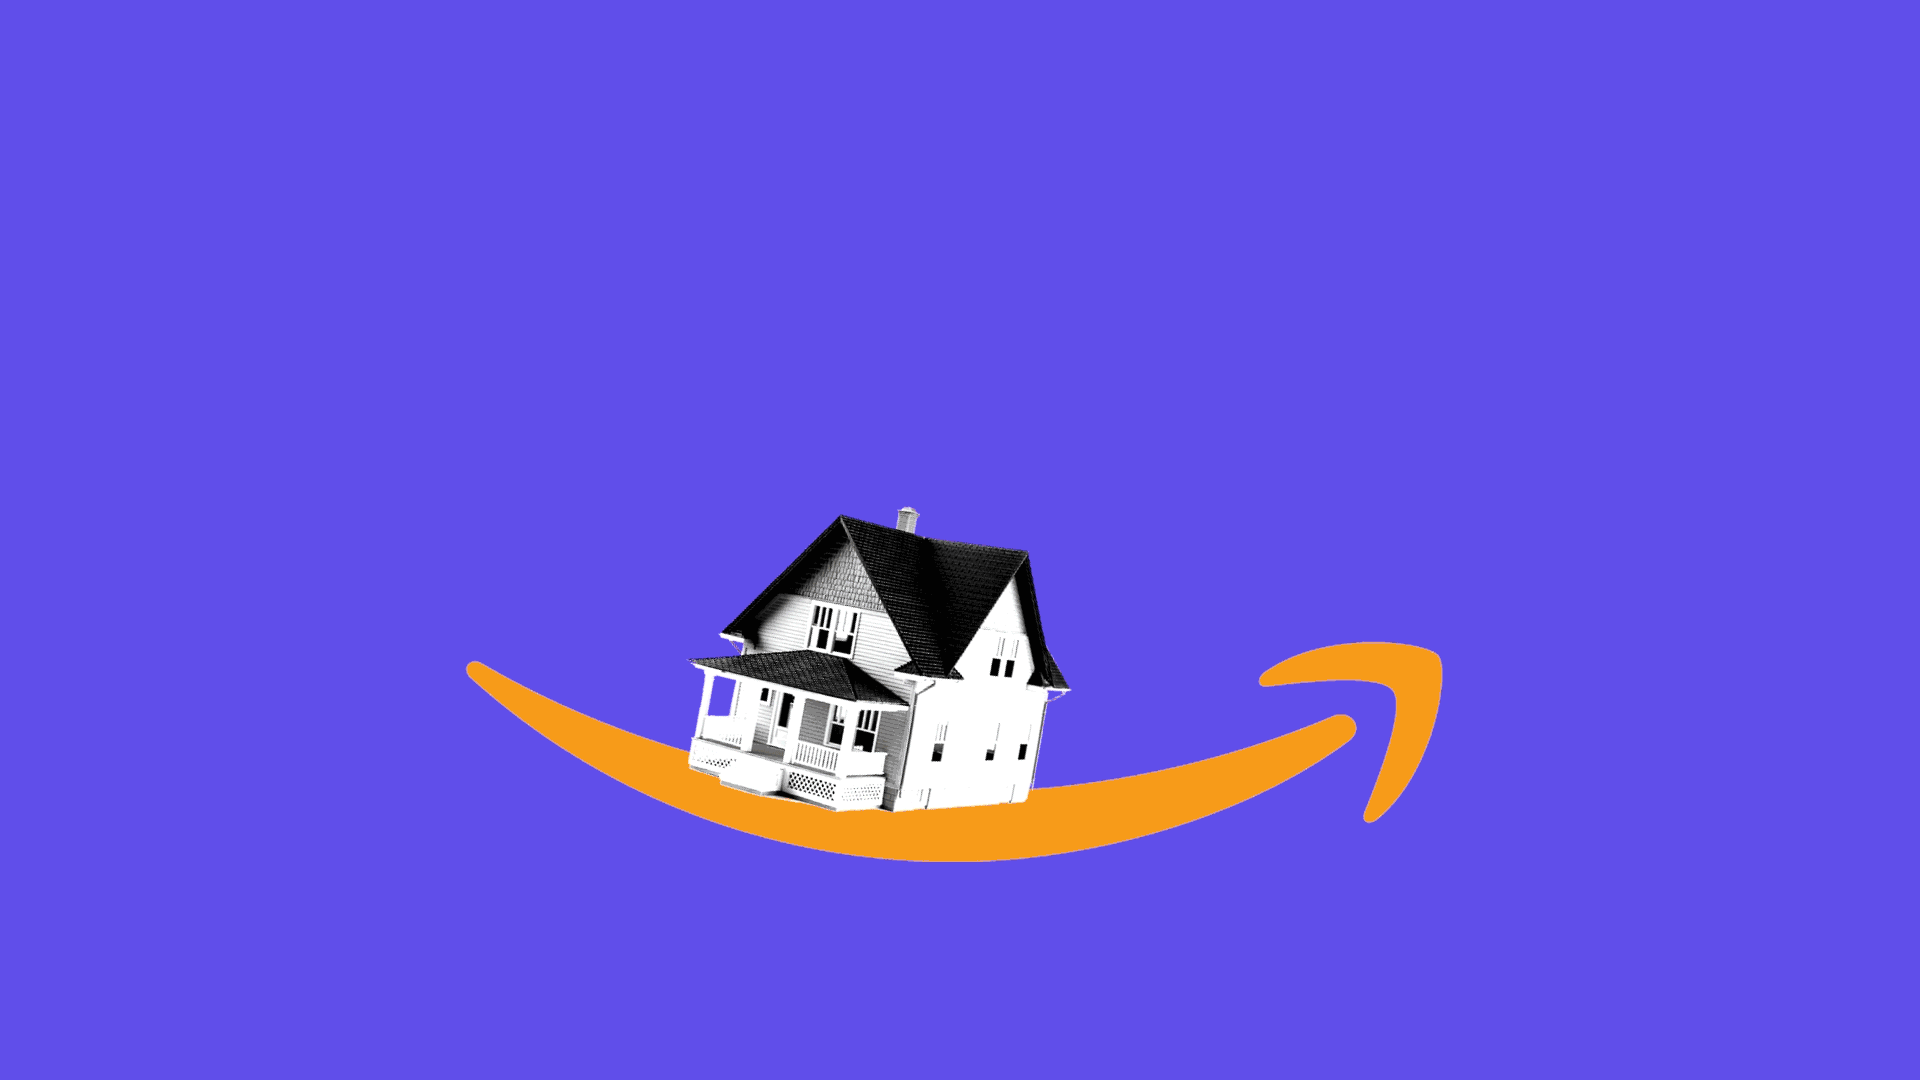 Wherever Amazon HQ2 goes, high home prices will likely follow - Axios1920 x 1080